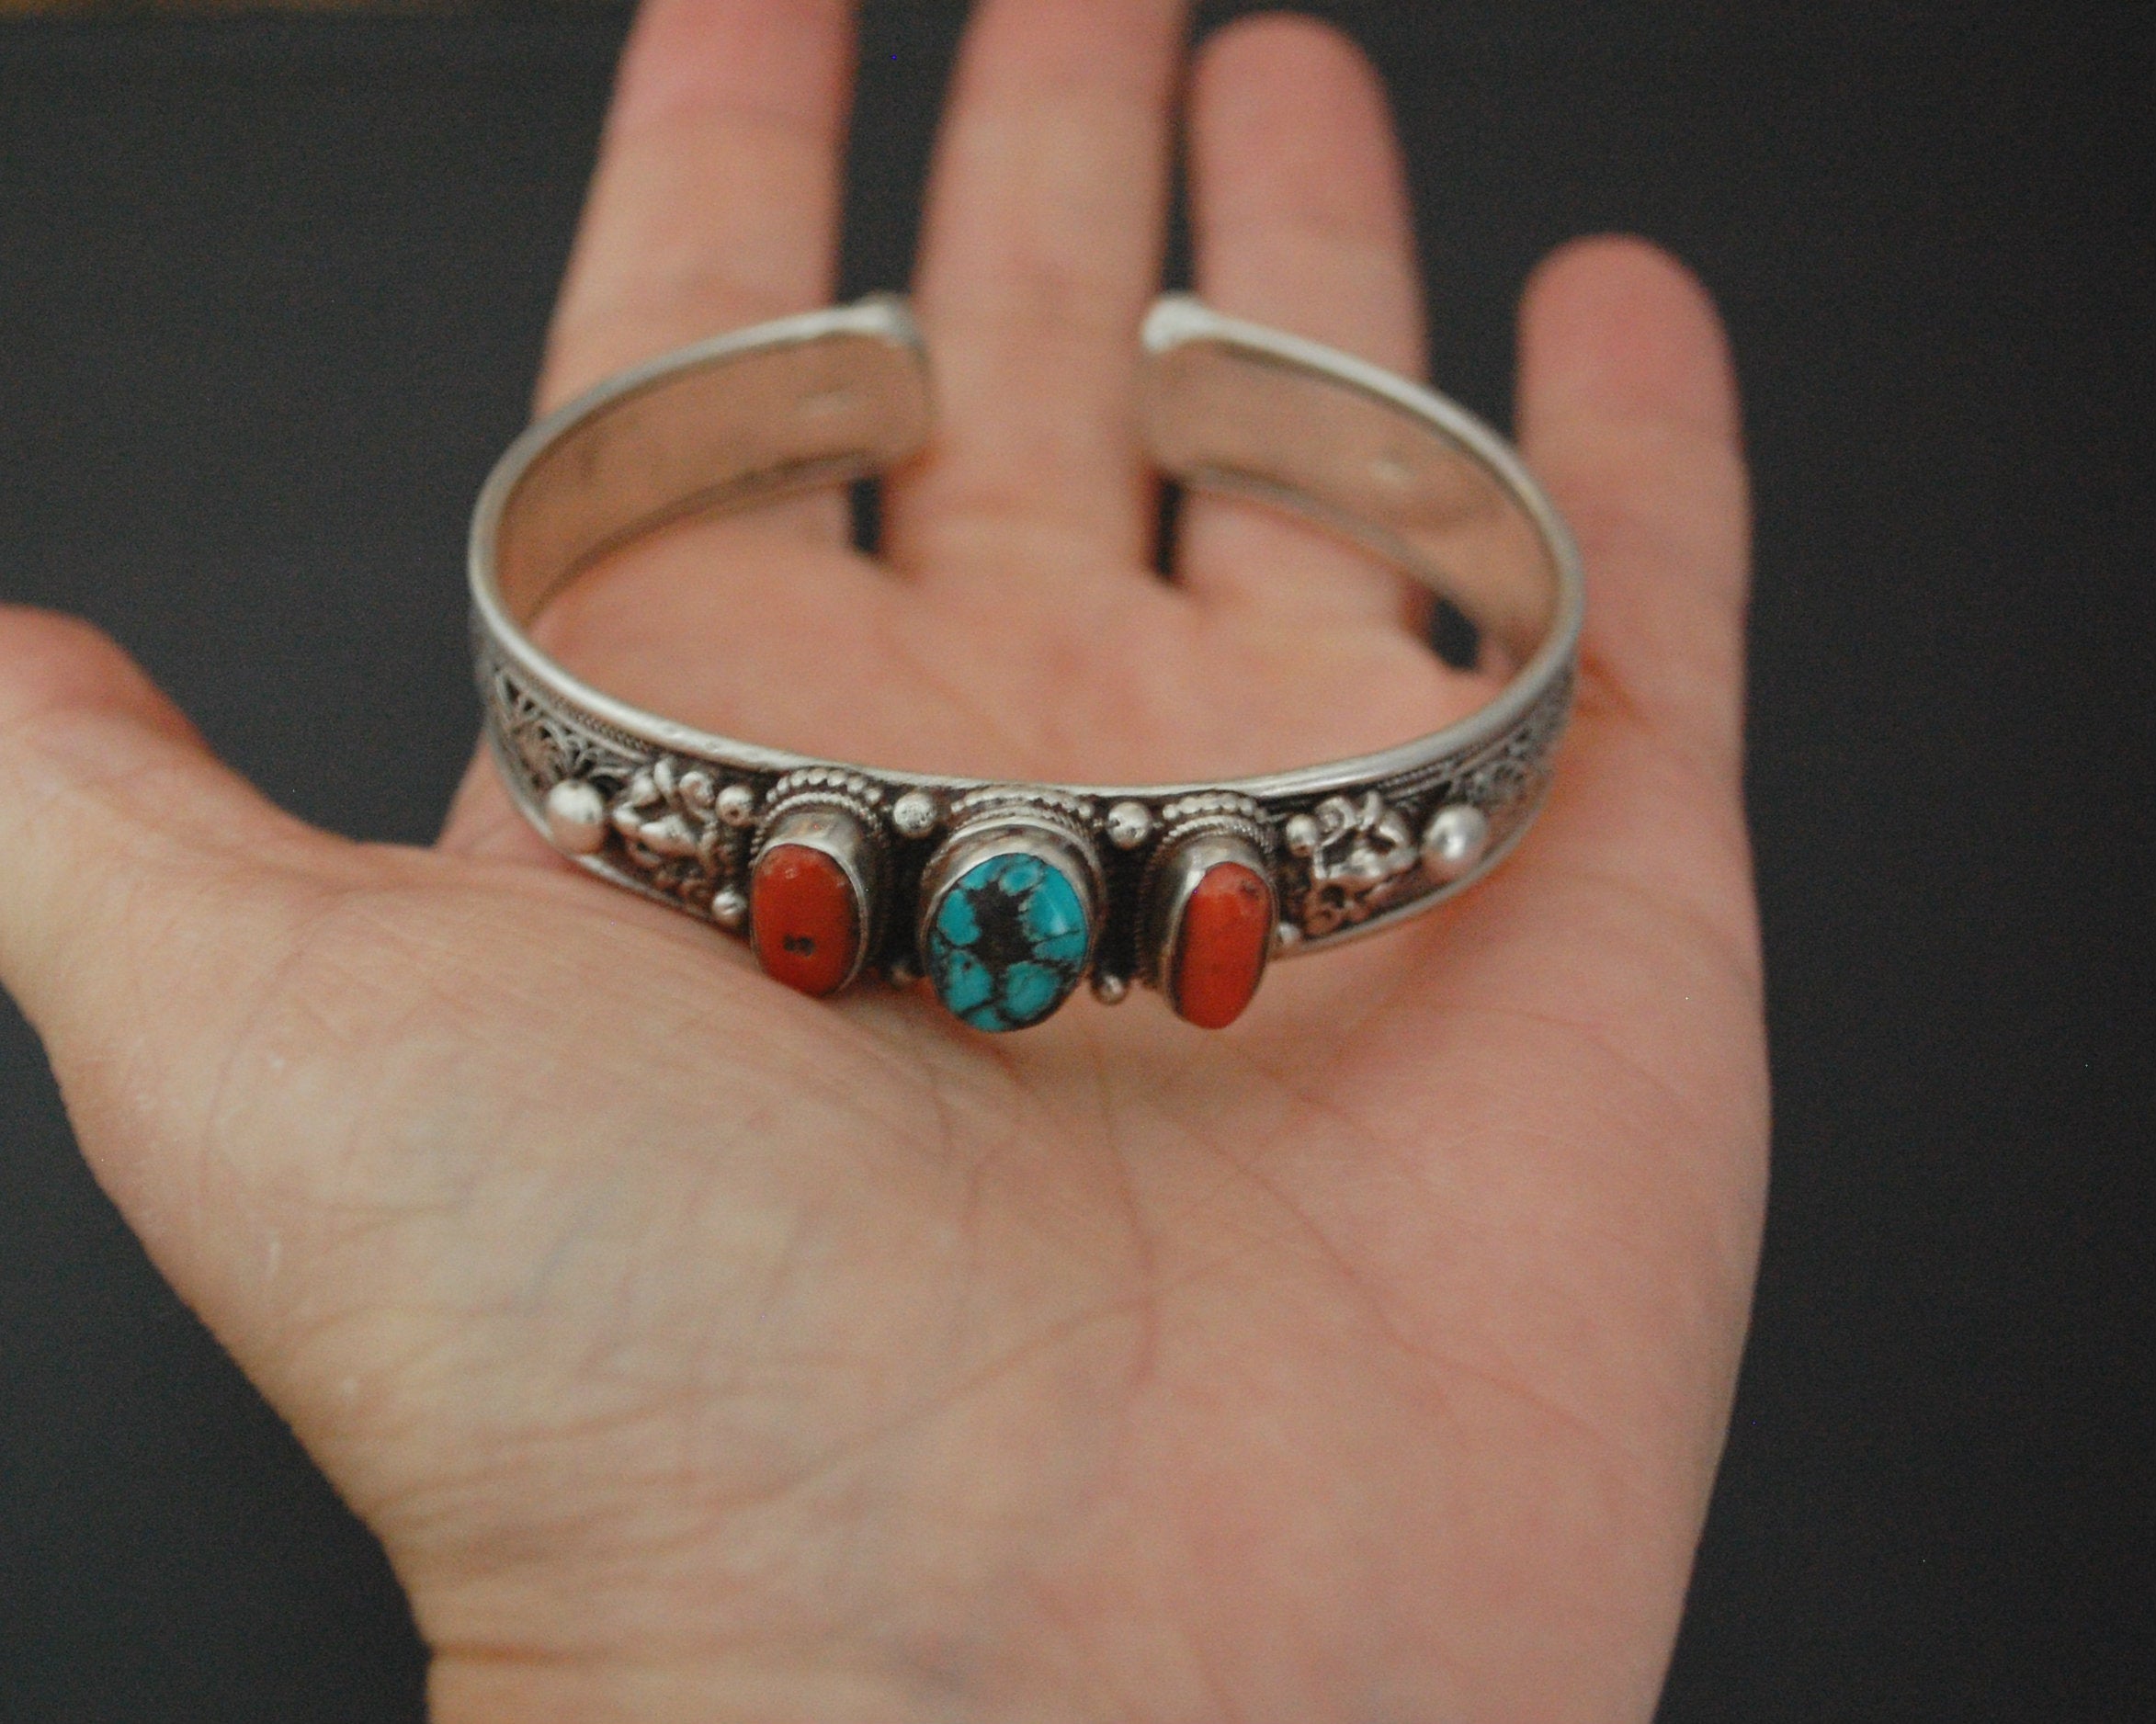 Nepali Turquoise Coral Cuff Bracelet with Filigree Work